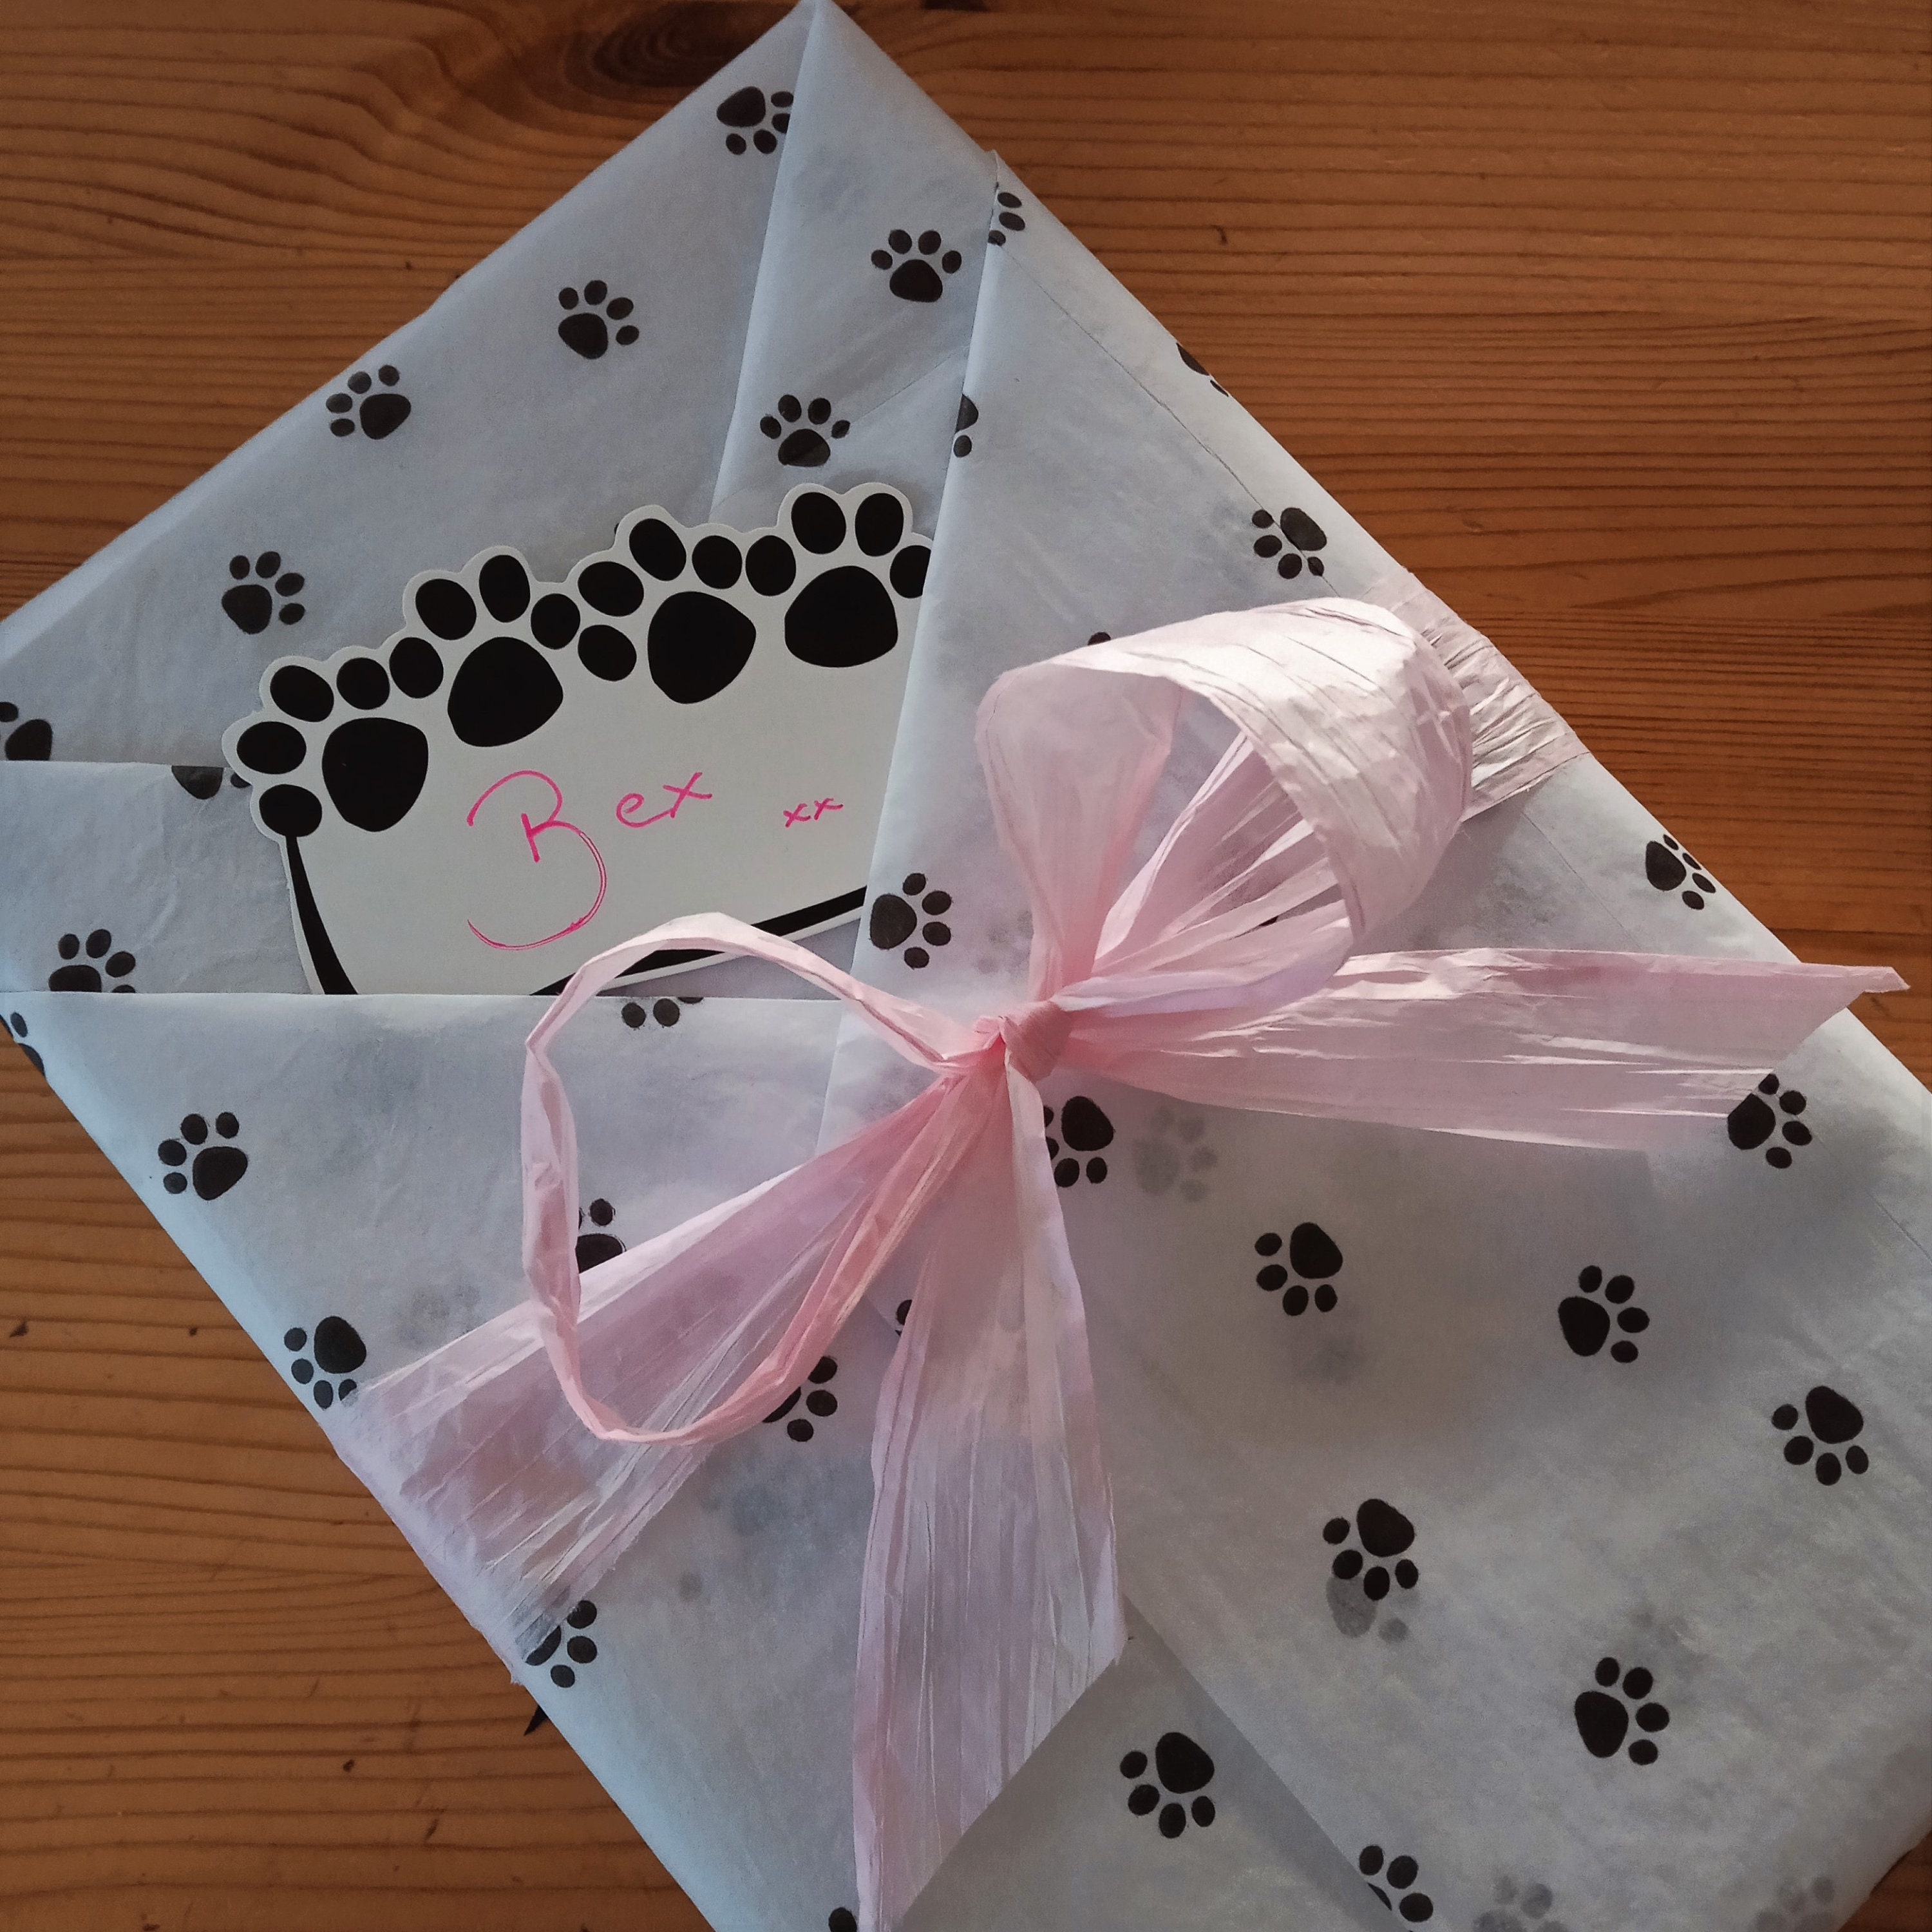 100 Sheets 20 * 14 Inches Dog Paw Print Tissue Paper, Puppy Paws